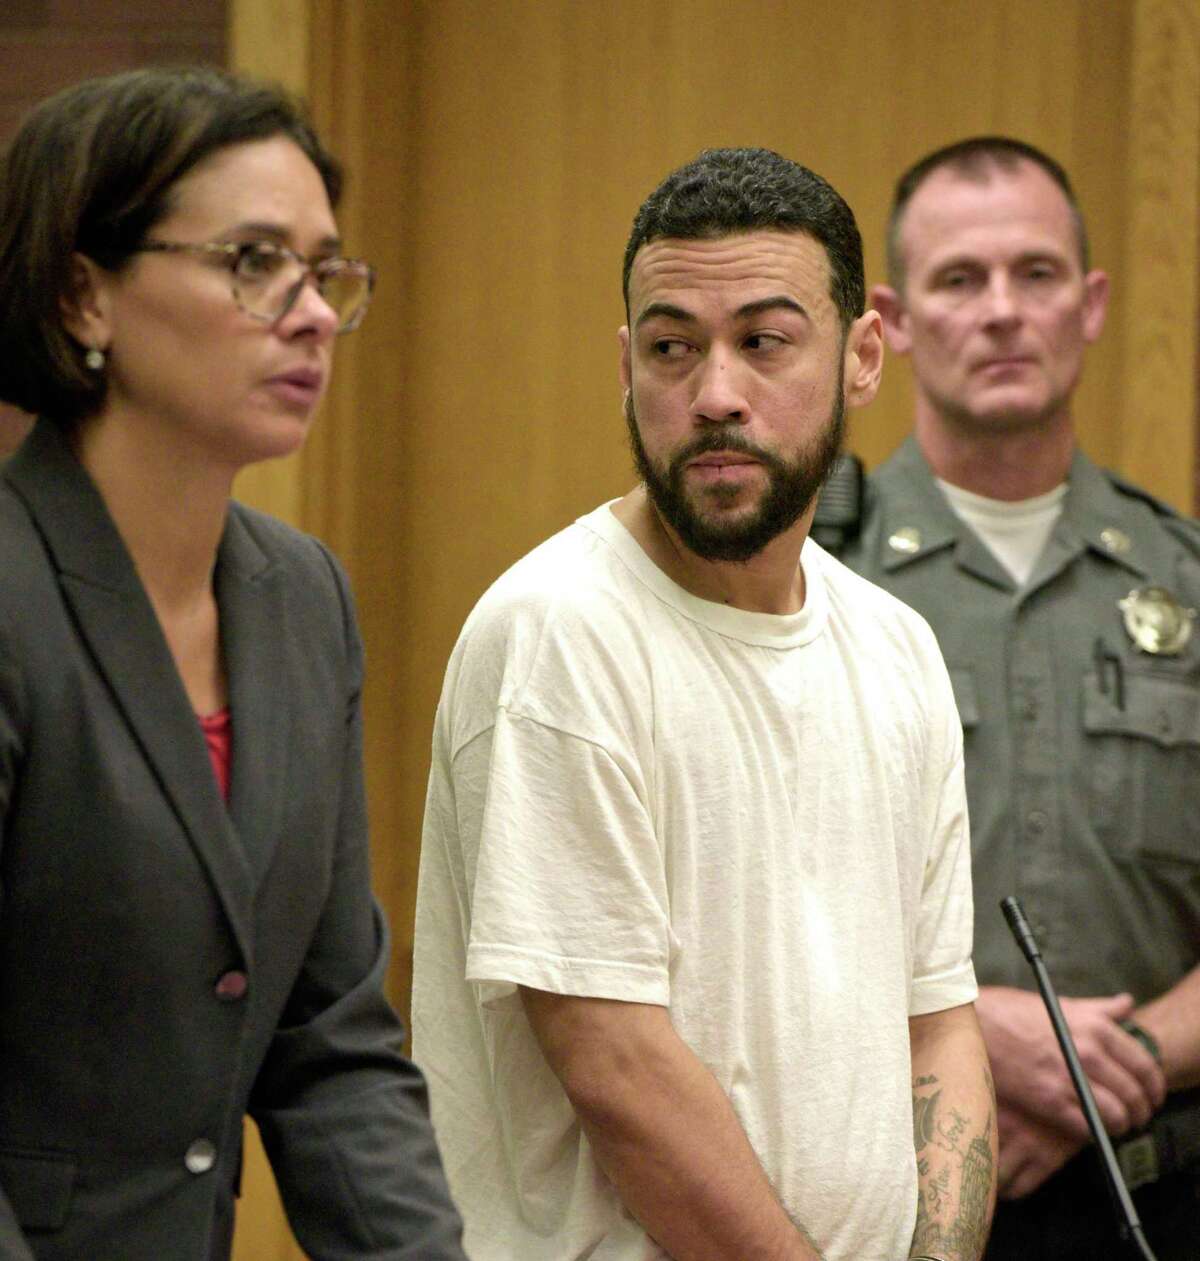 David Ramos, of Danbury, appeared in Danbury Superior Court alongside his attorney Jennifer Tunnard on Tuesday. Ramos was arrested Sept. 11, and is facing first-degree manslaughter, possession of a controlled substance, possession with intent to sell, use of drug paraphernalia, failure to keep narcotics in original containers and interfering with police charges. October 20, 2019, in Danbury, Conn.